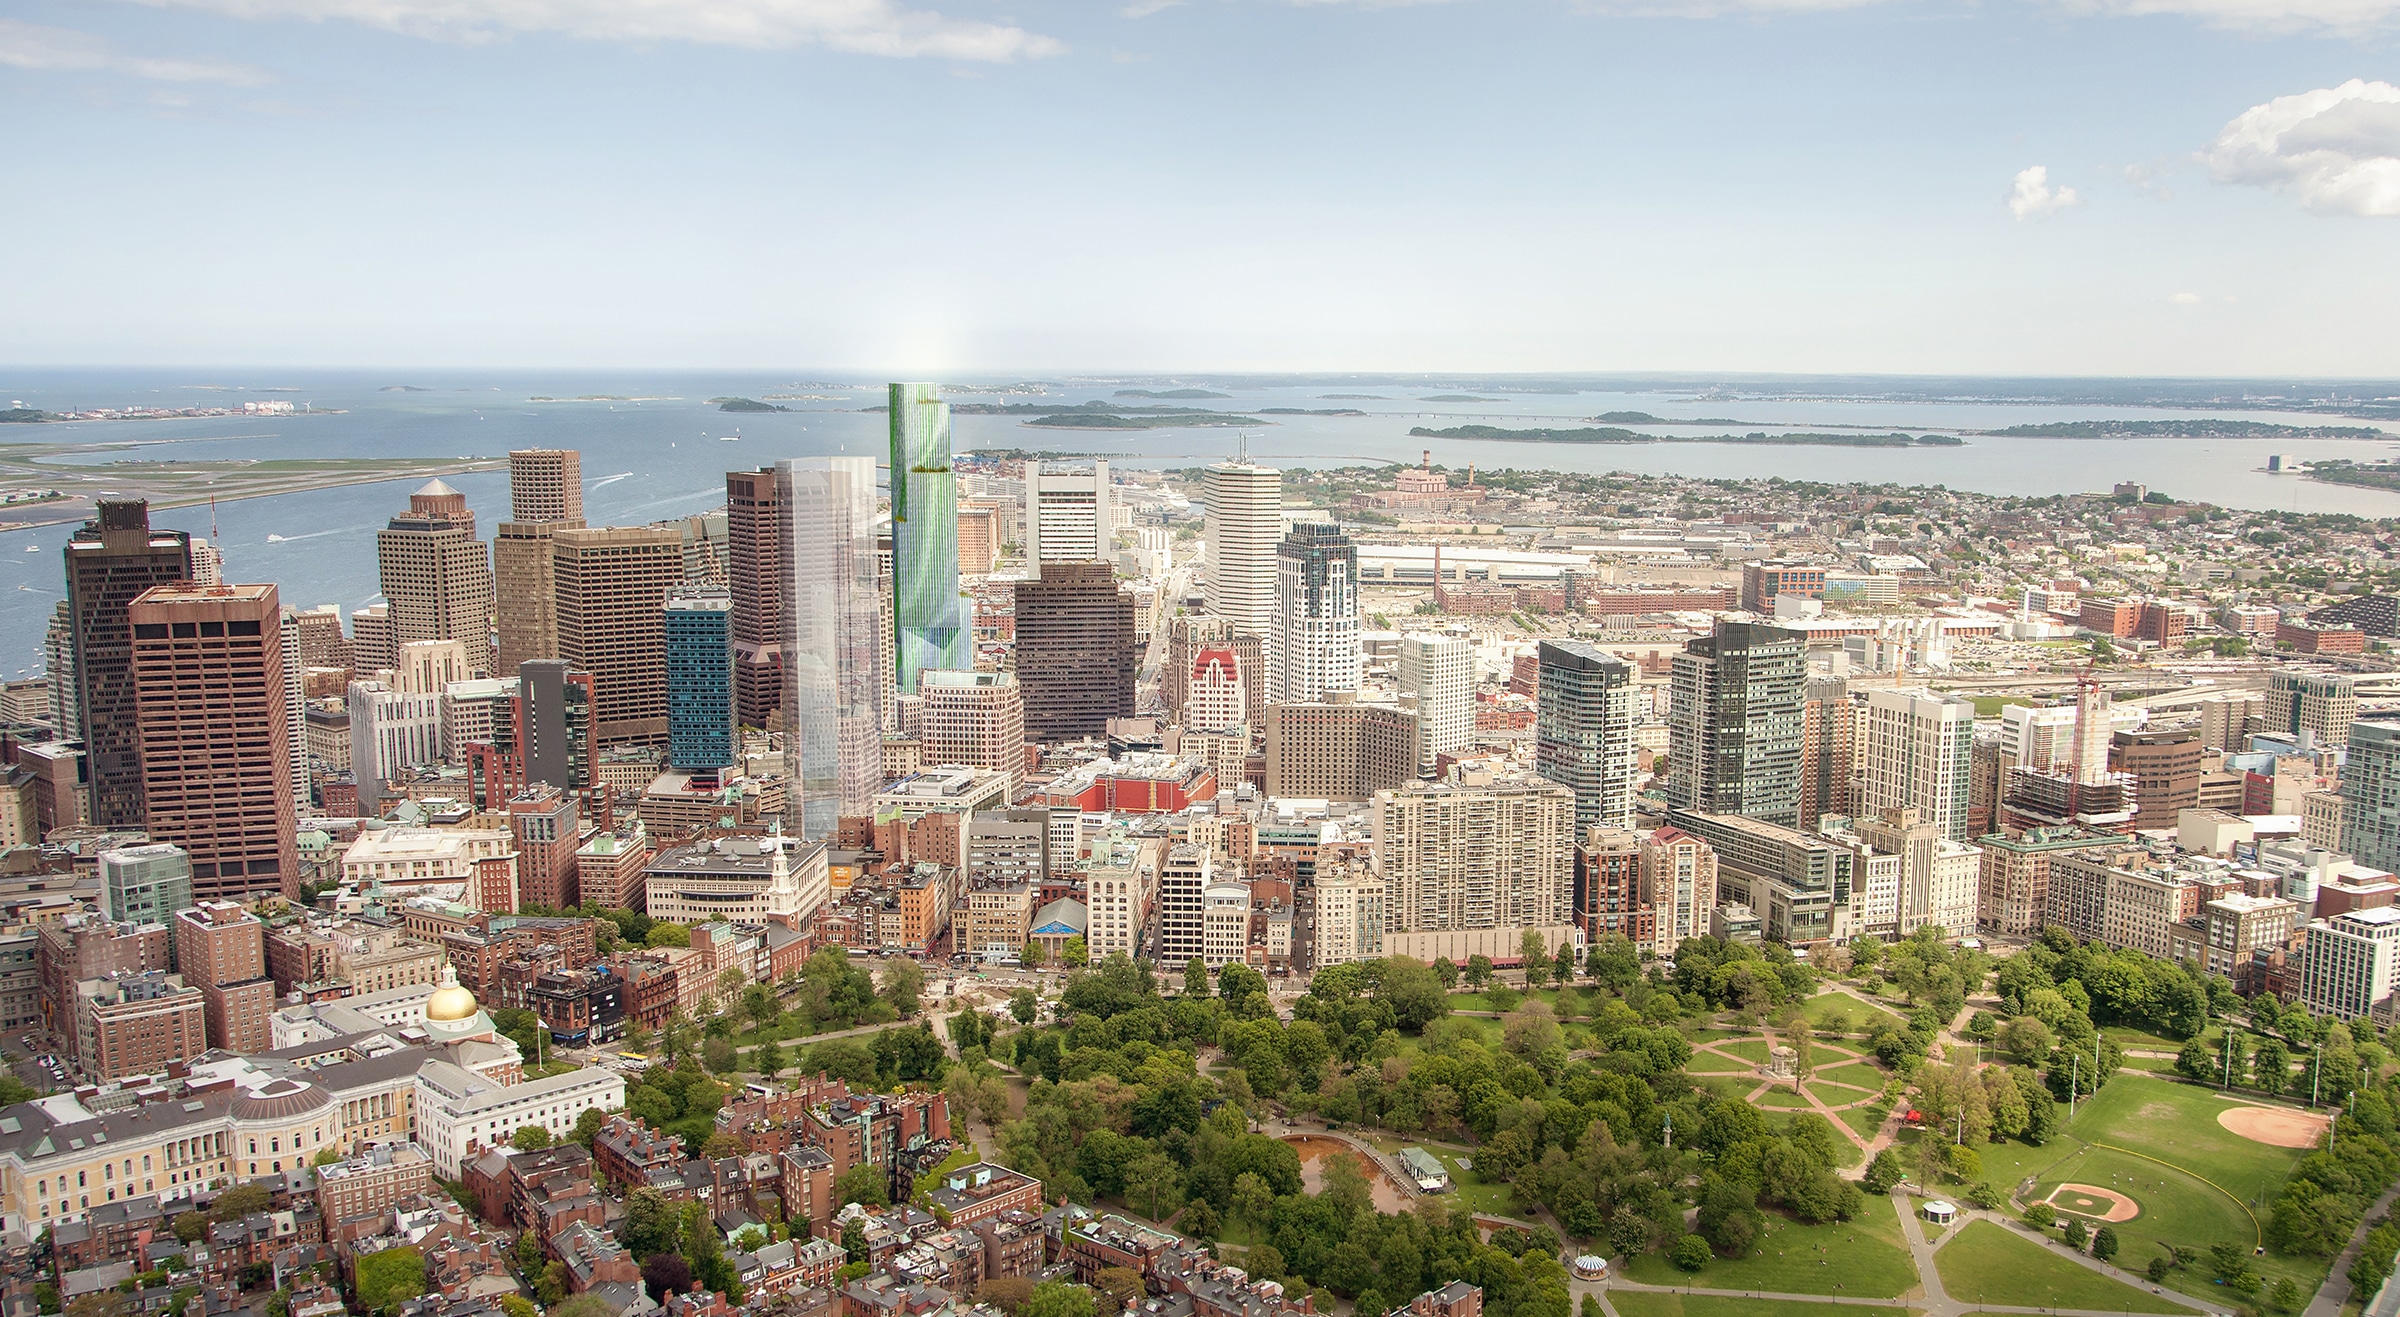 A Look Inside Our Team’s Proposal for Winthrop Square